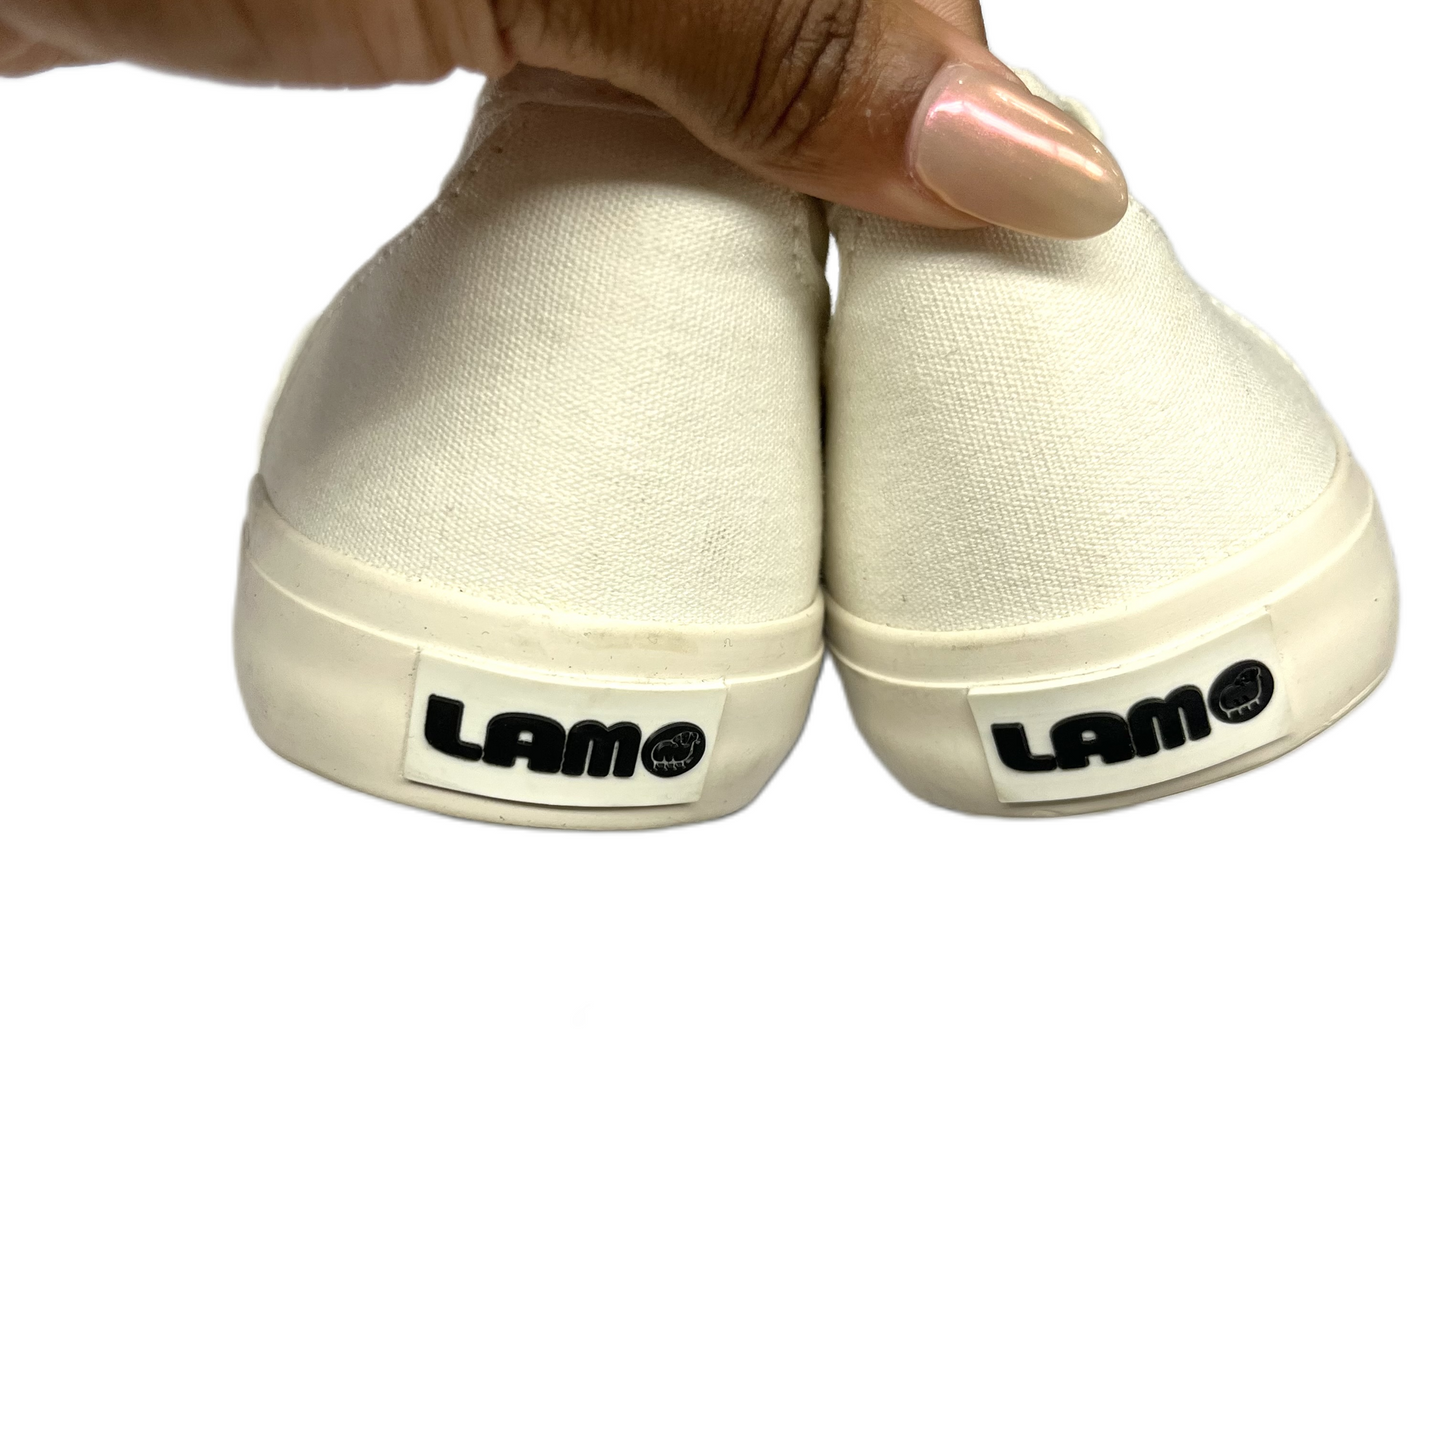 Shoes Flats By Lamb  Size: 8